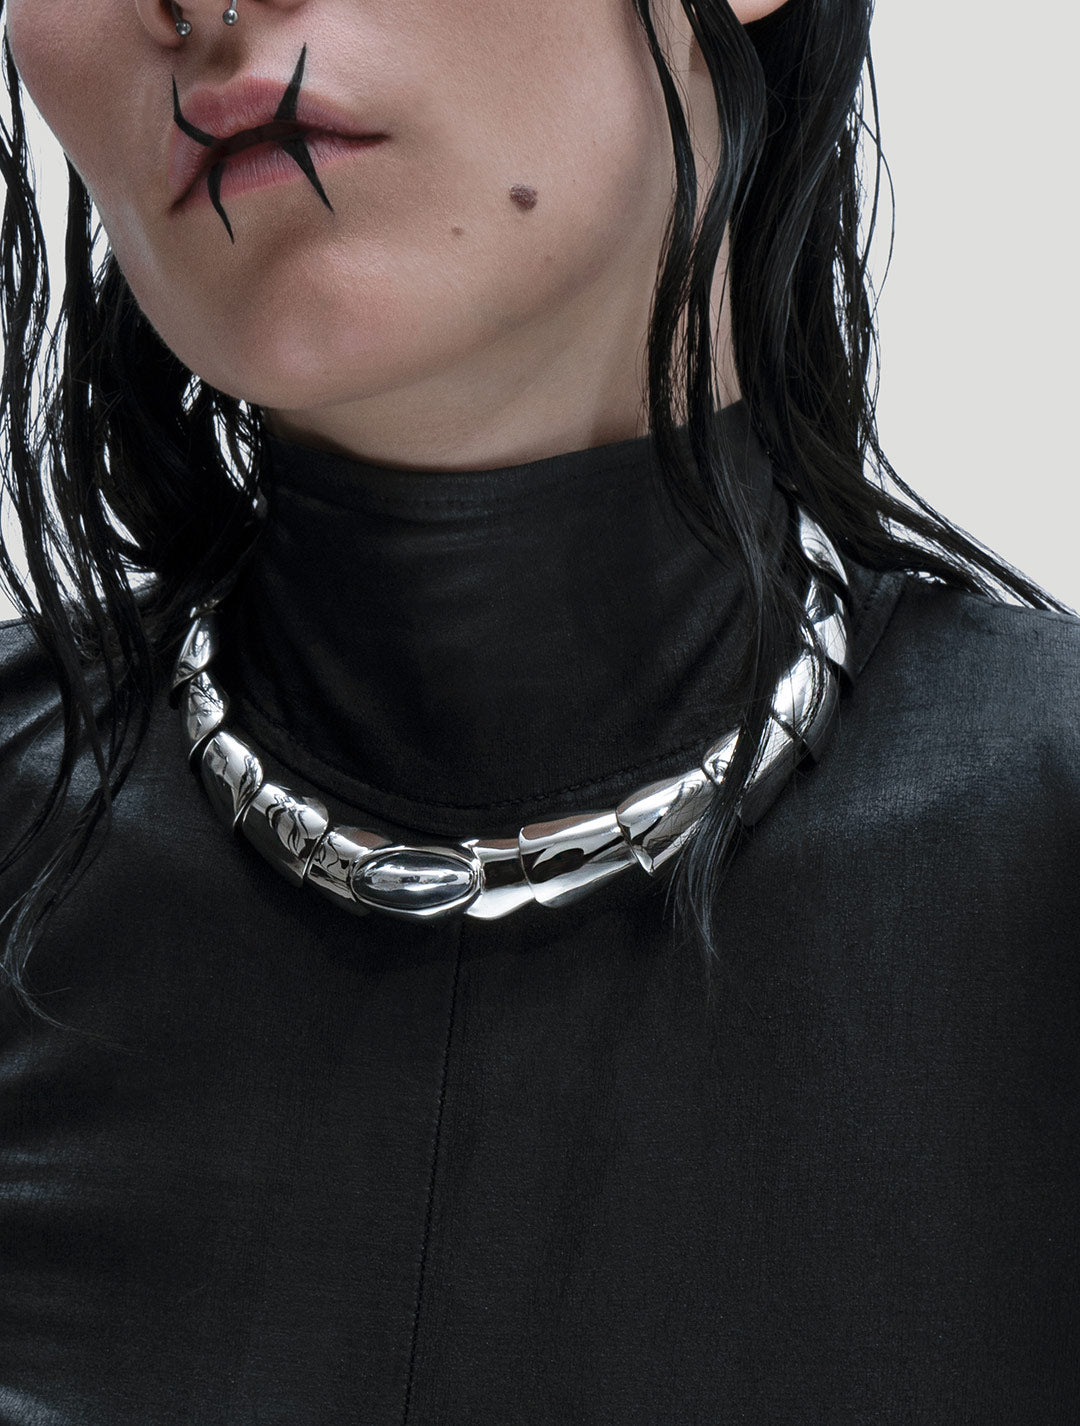 Armadillo Tech Choker by Costume Therapy - Psylo